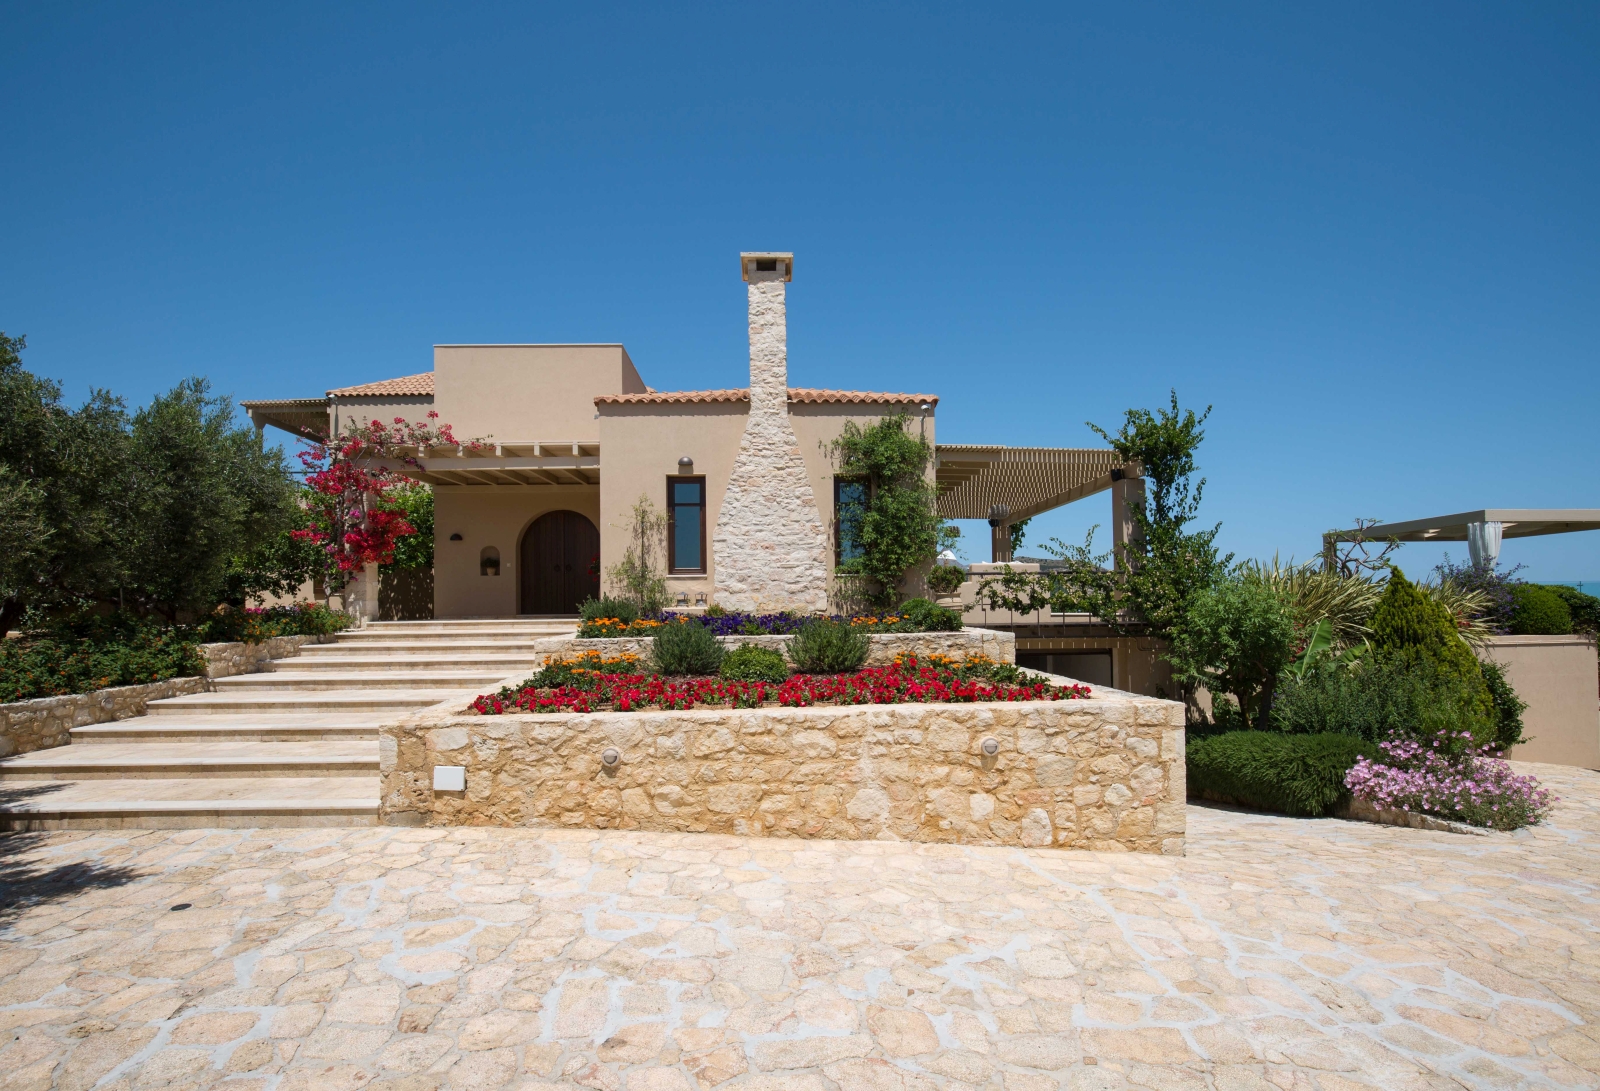 Flowers, trees, plants, driveway, entrance steps and front door at Villa Filira on Crete, Greece 